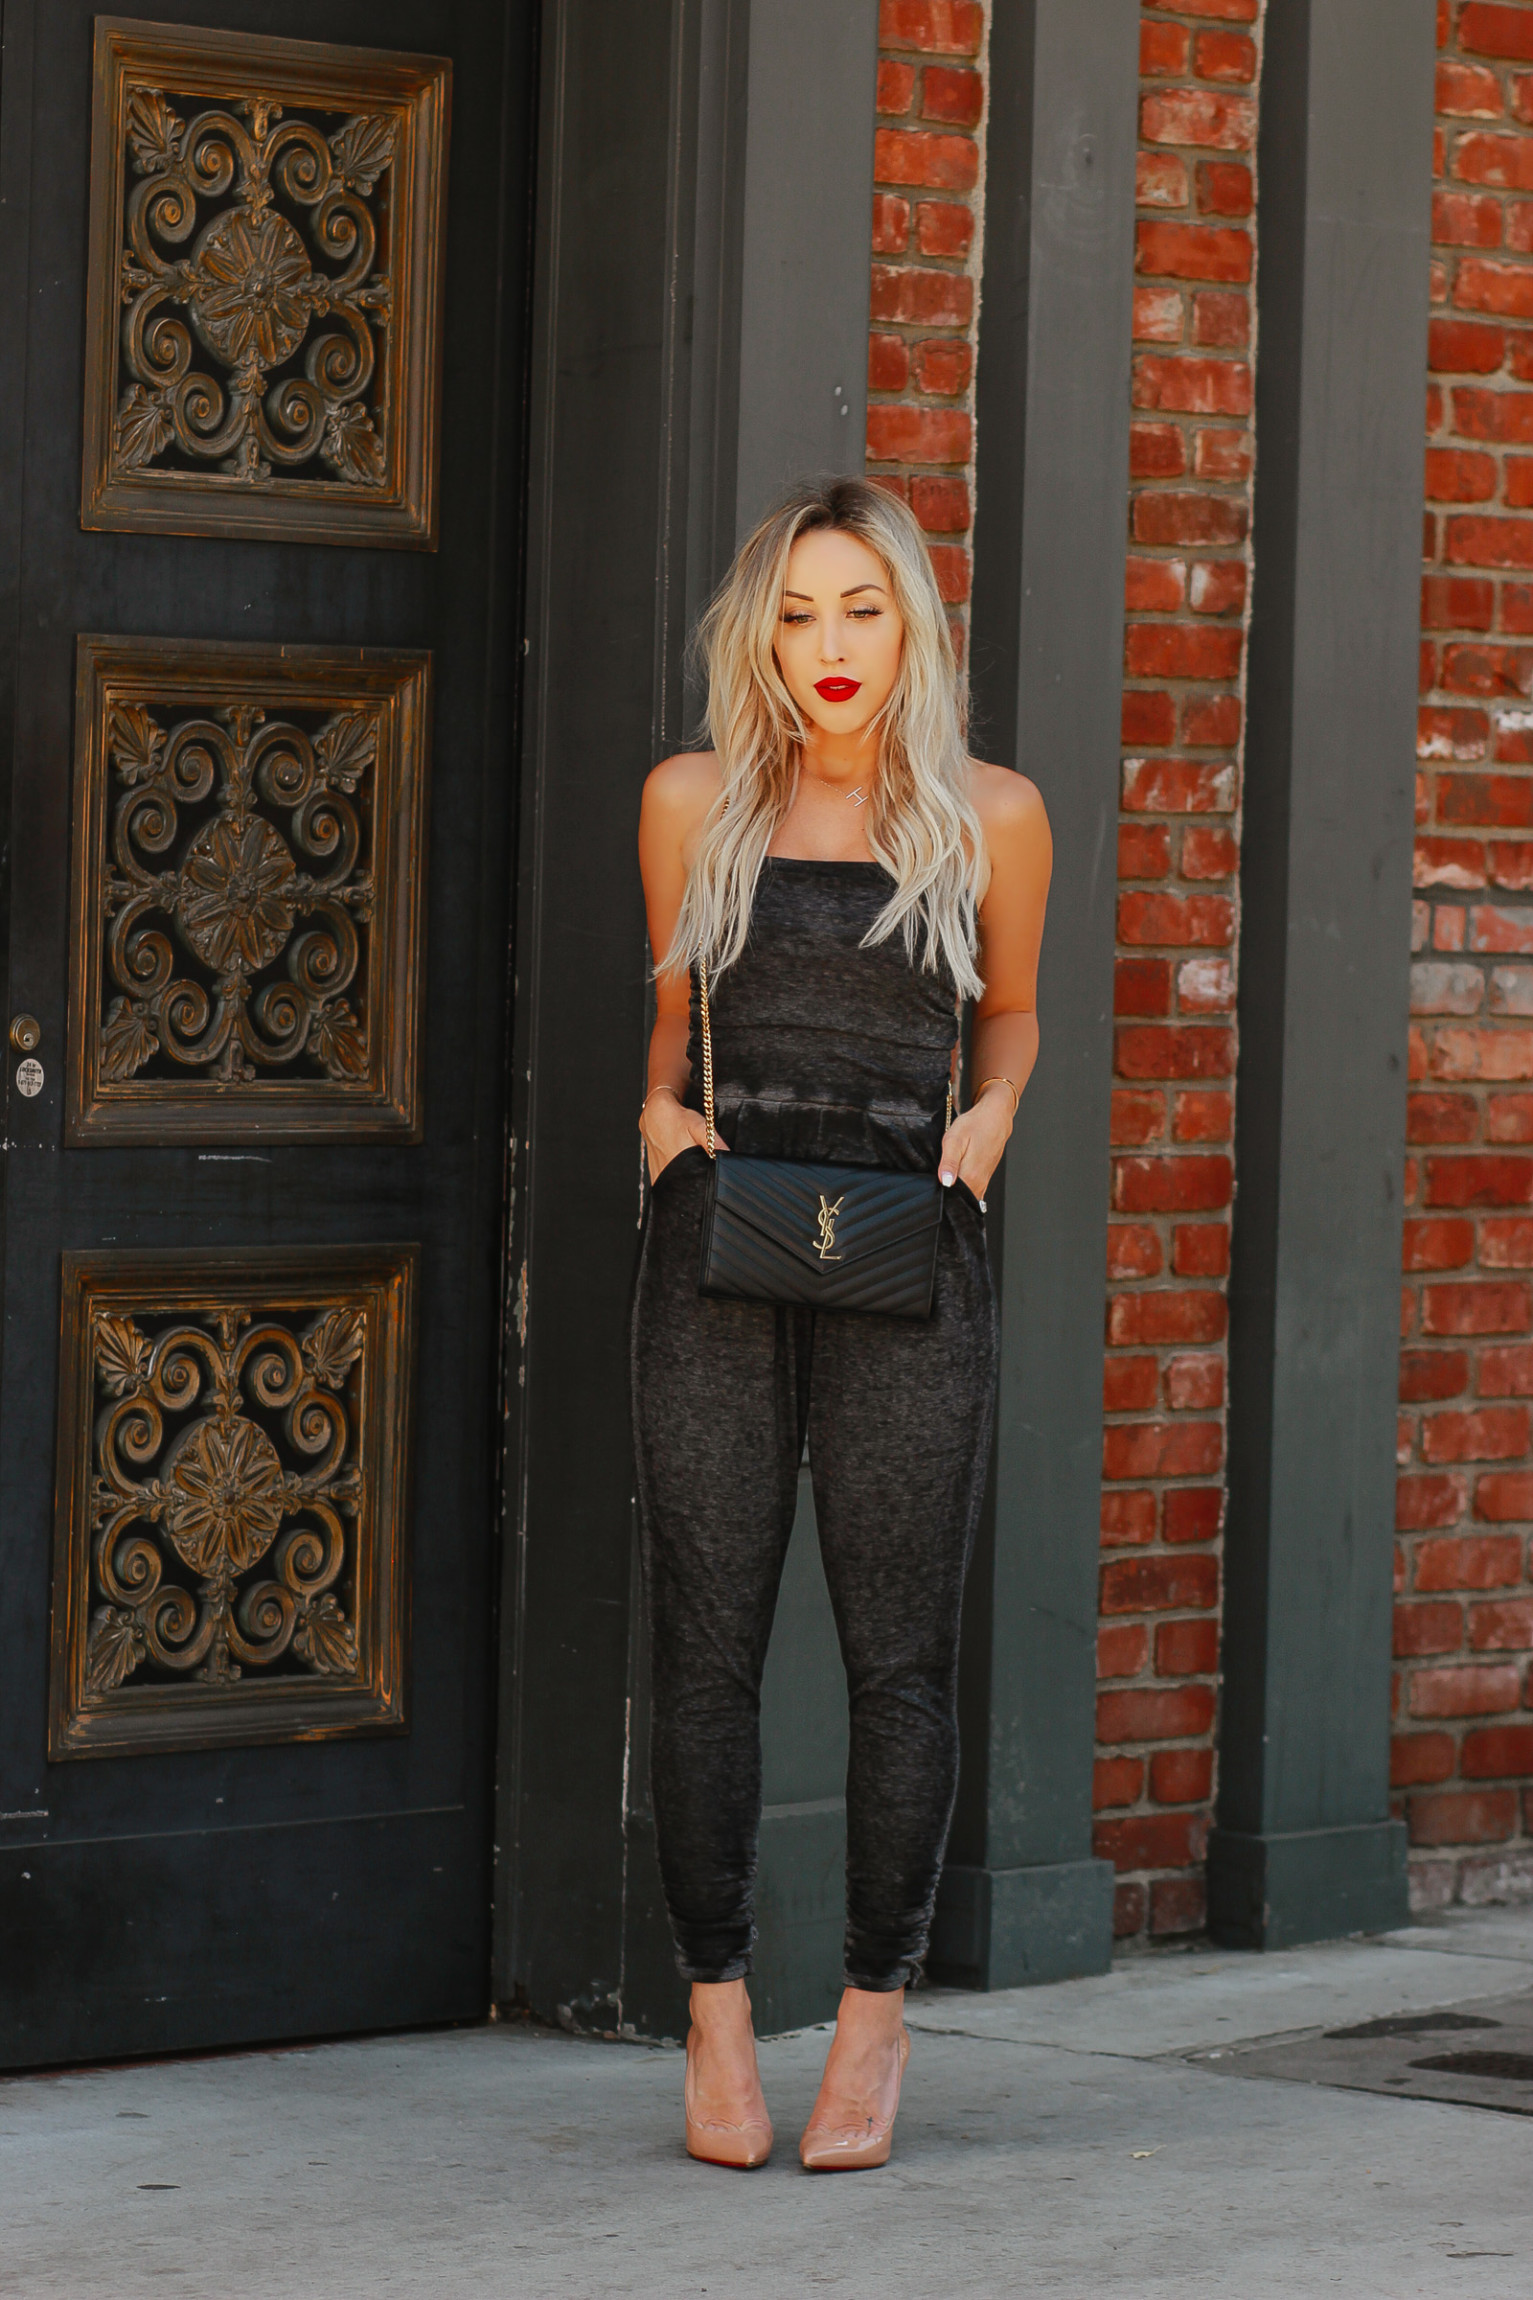 Charcoal Colored Jumpsuit | Nude Louboutins | YSL Bag | Red Lipstick | Fashion Blogger | Blondie in the City by Hayley Larue